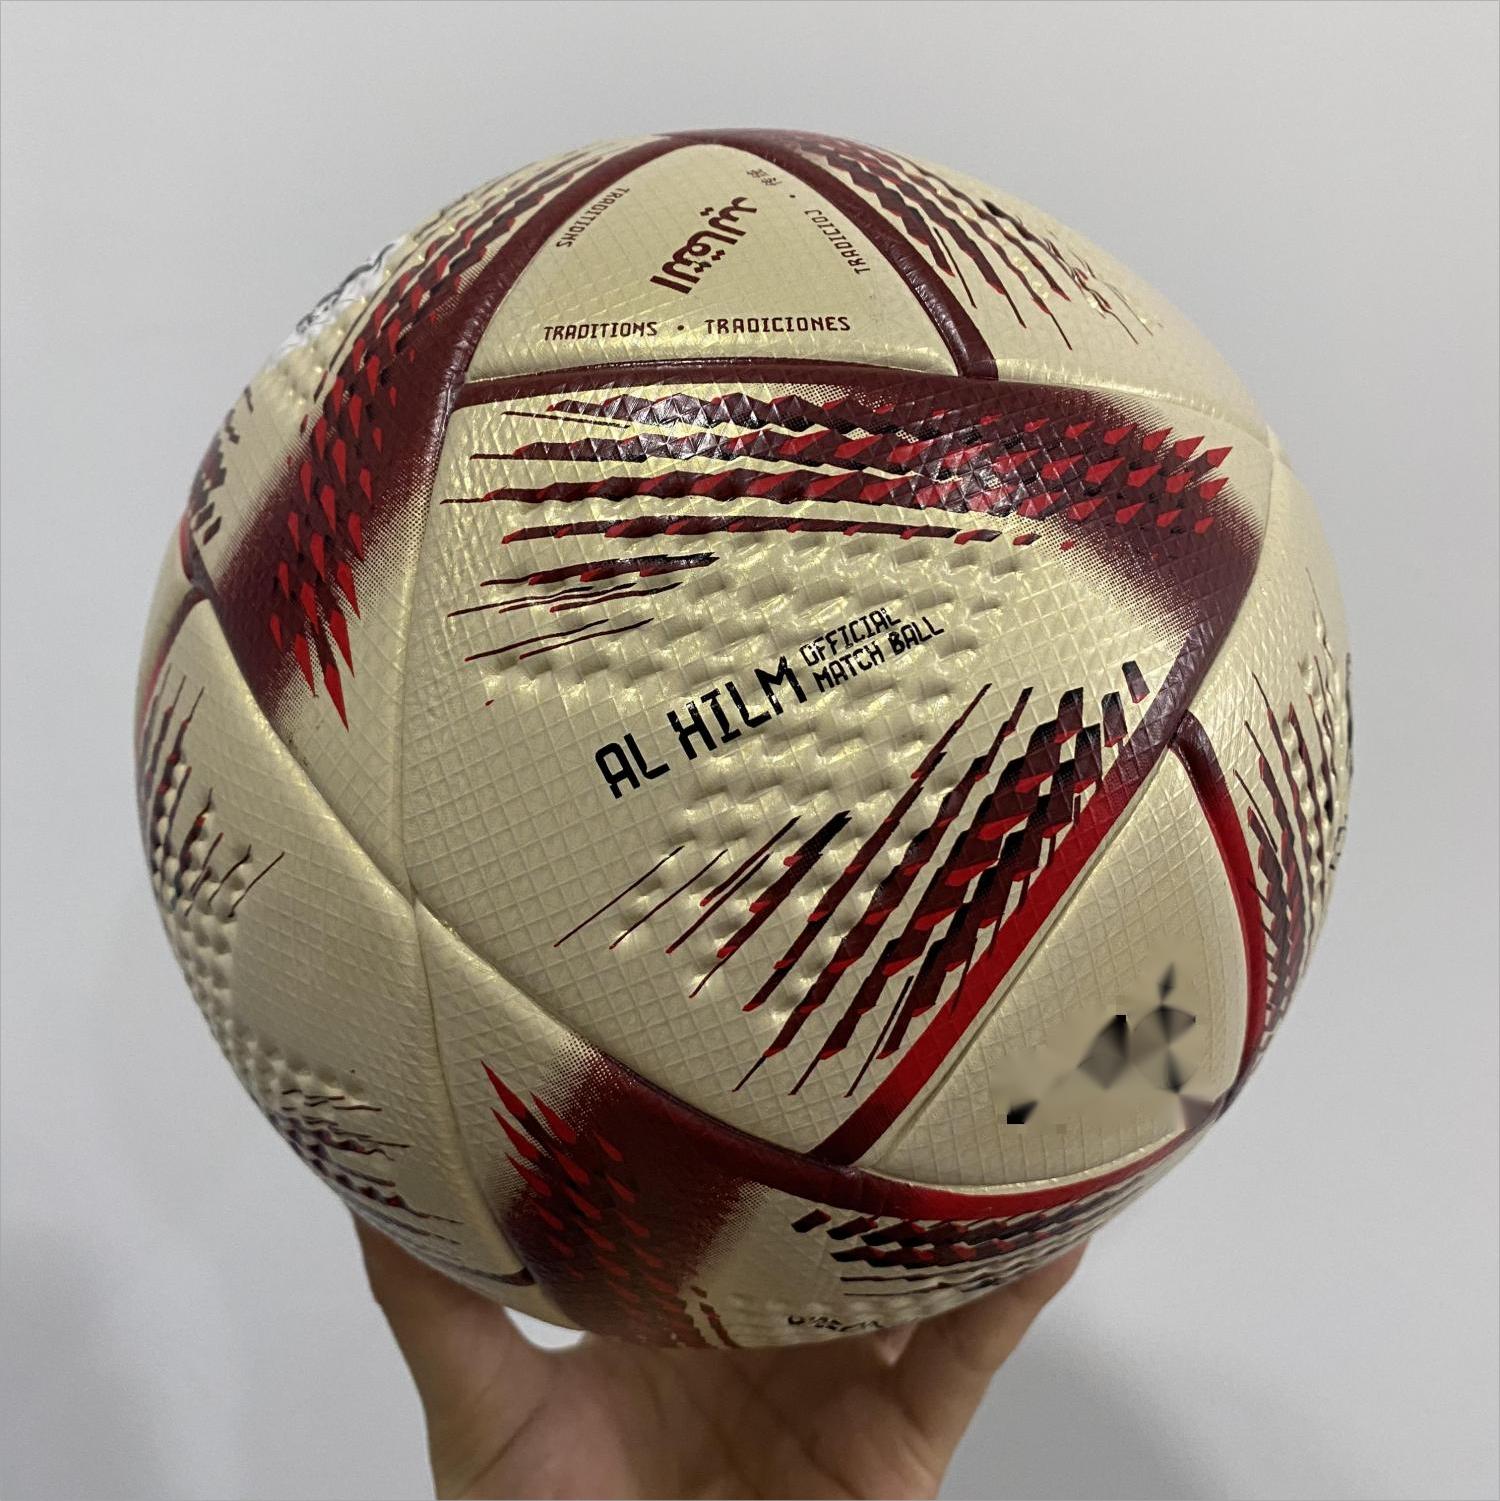 Soccer balls World Cup finals dedicated high-quality PU football fitting craftsmanship exquisite replica match training collection AL HILM and AL RIHLA